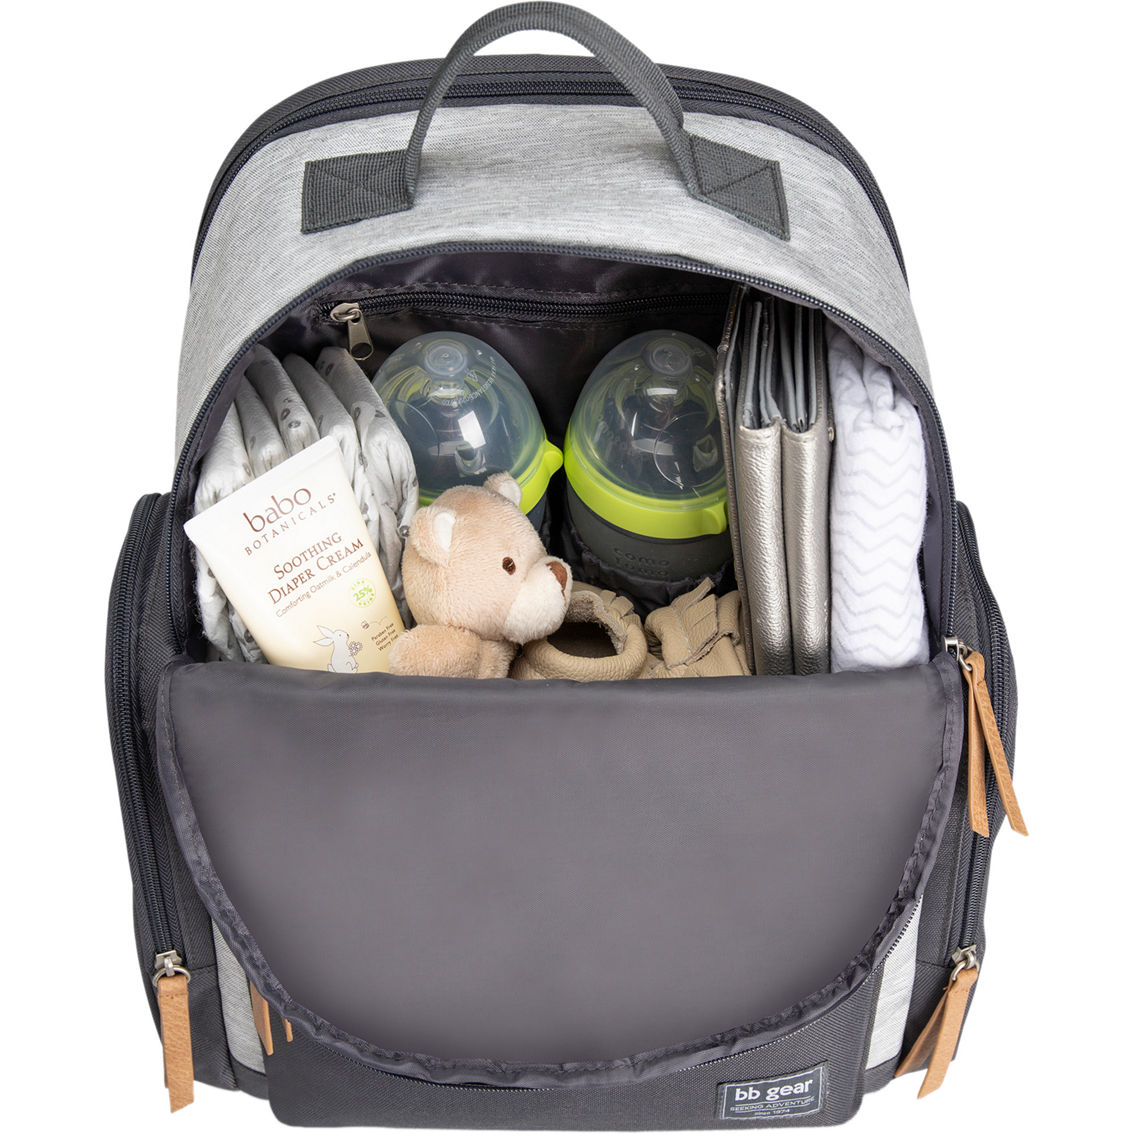 Baby Boom Gear Stonescape Backpack Diaper Bag - Image 4 of 7